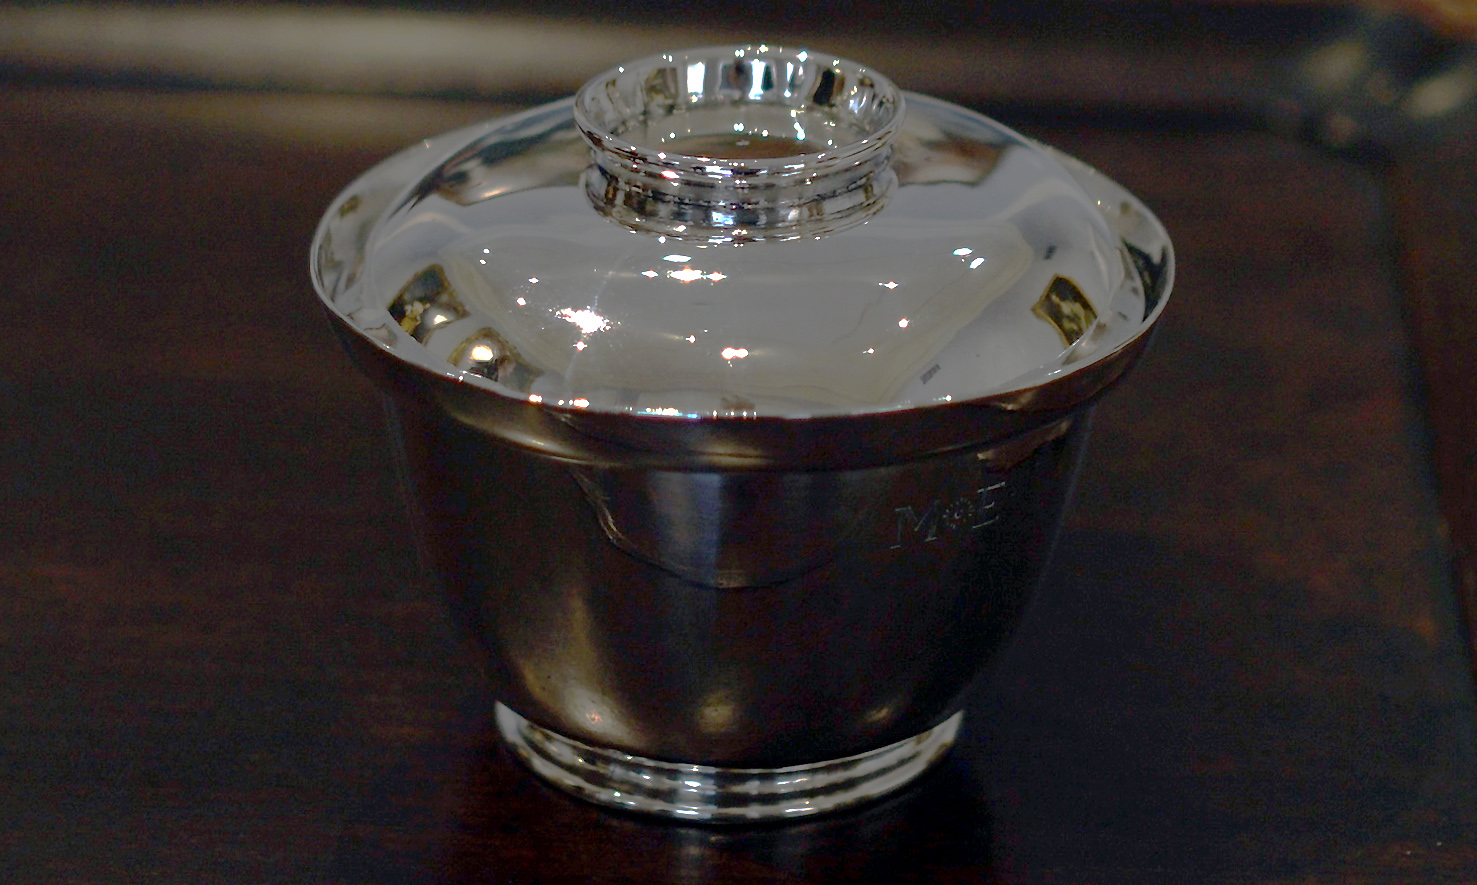 Covered sugar bowl, c. 1745, silver, 11.5 x 9.1 cm (Wadsworth Atheneum Museum of Art)